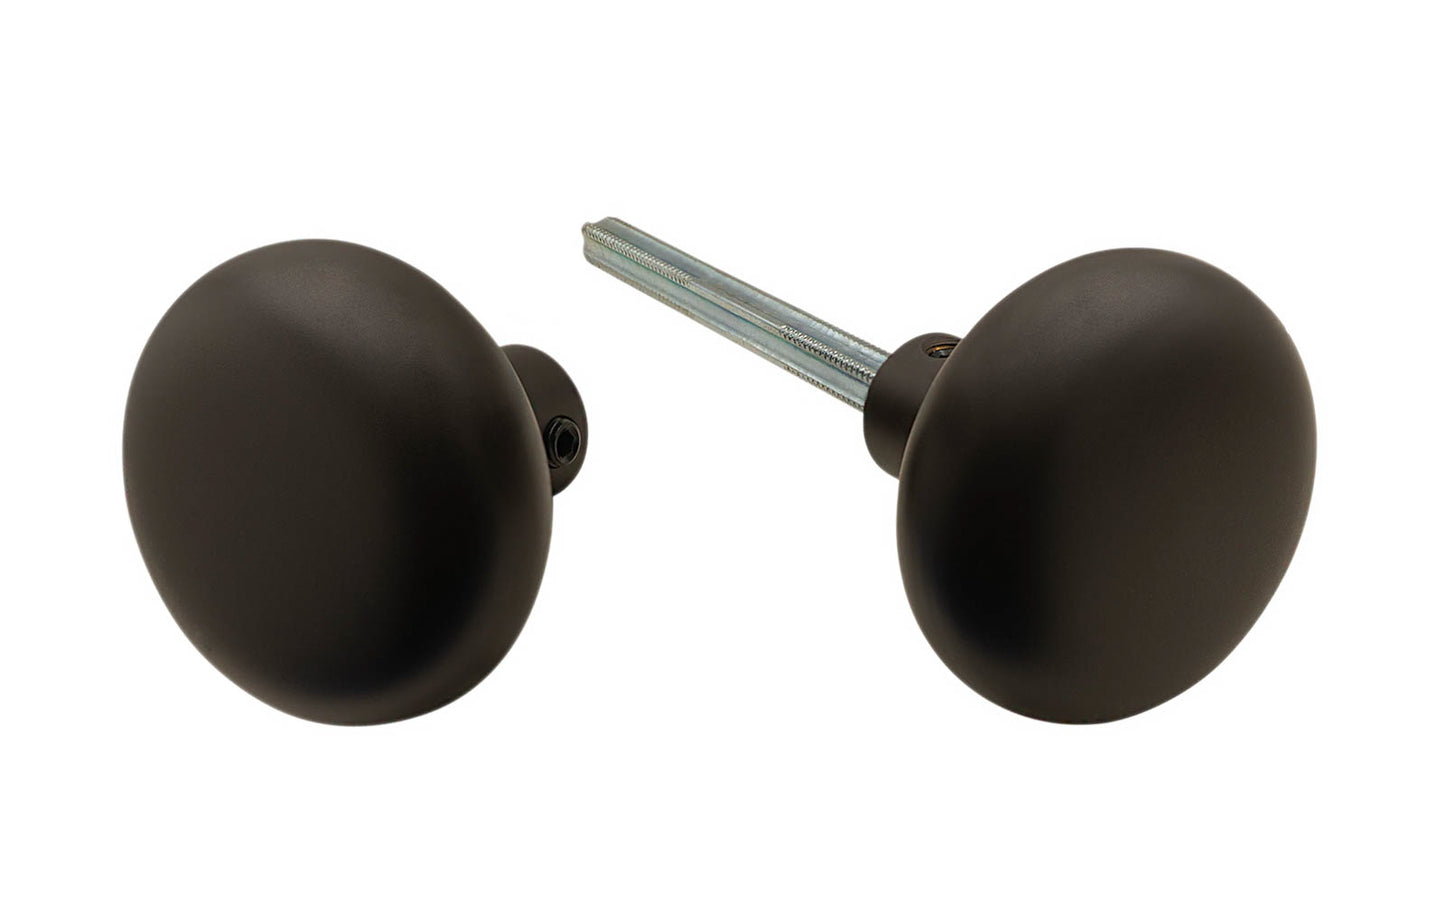 Pair of Traditional & Classic Brass Smooth Design Doorknobs with spindle. Quality hollow core wrought brass doorknobs with an attractive circle-ring design. Reproduction Brass Door Knobs. Traditional Brass Knobs with Spindle. Oil Rubbed Bronze Finish.